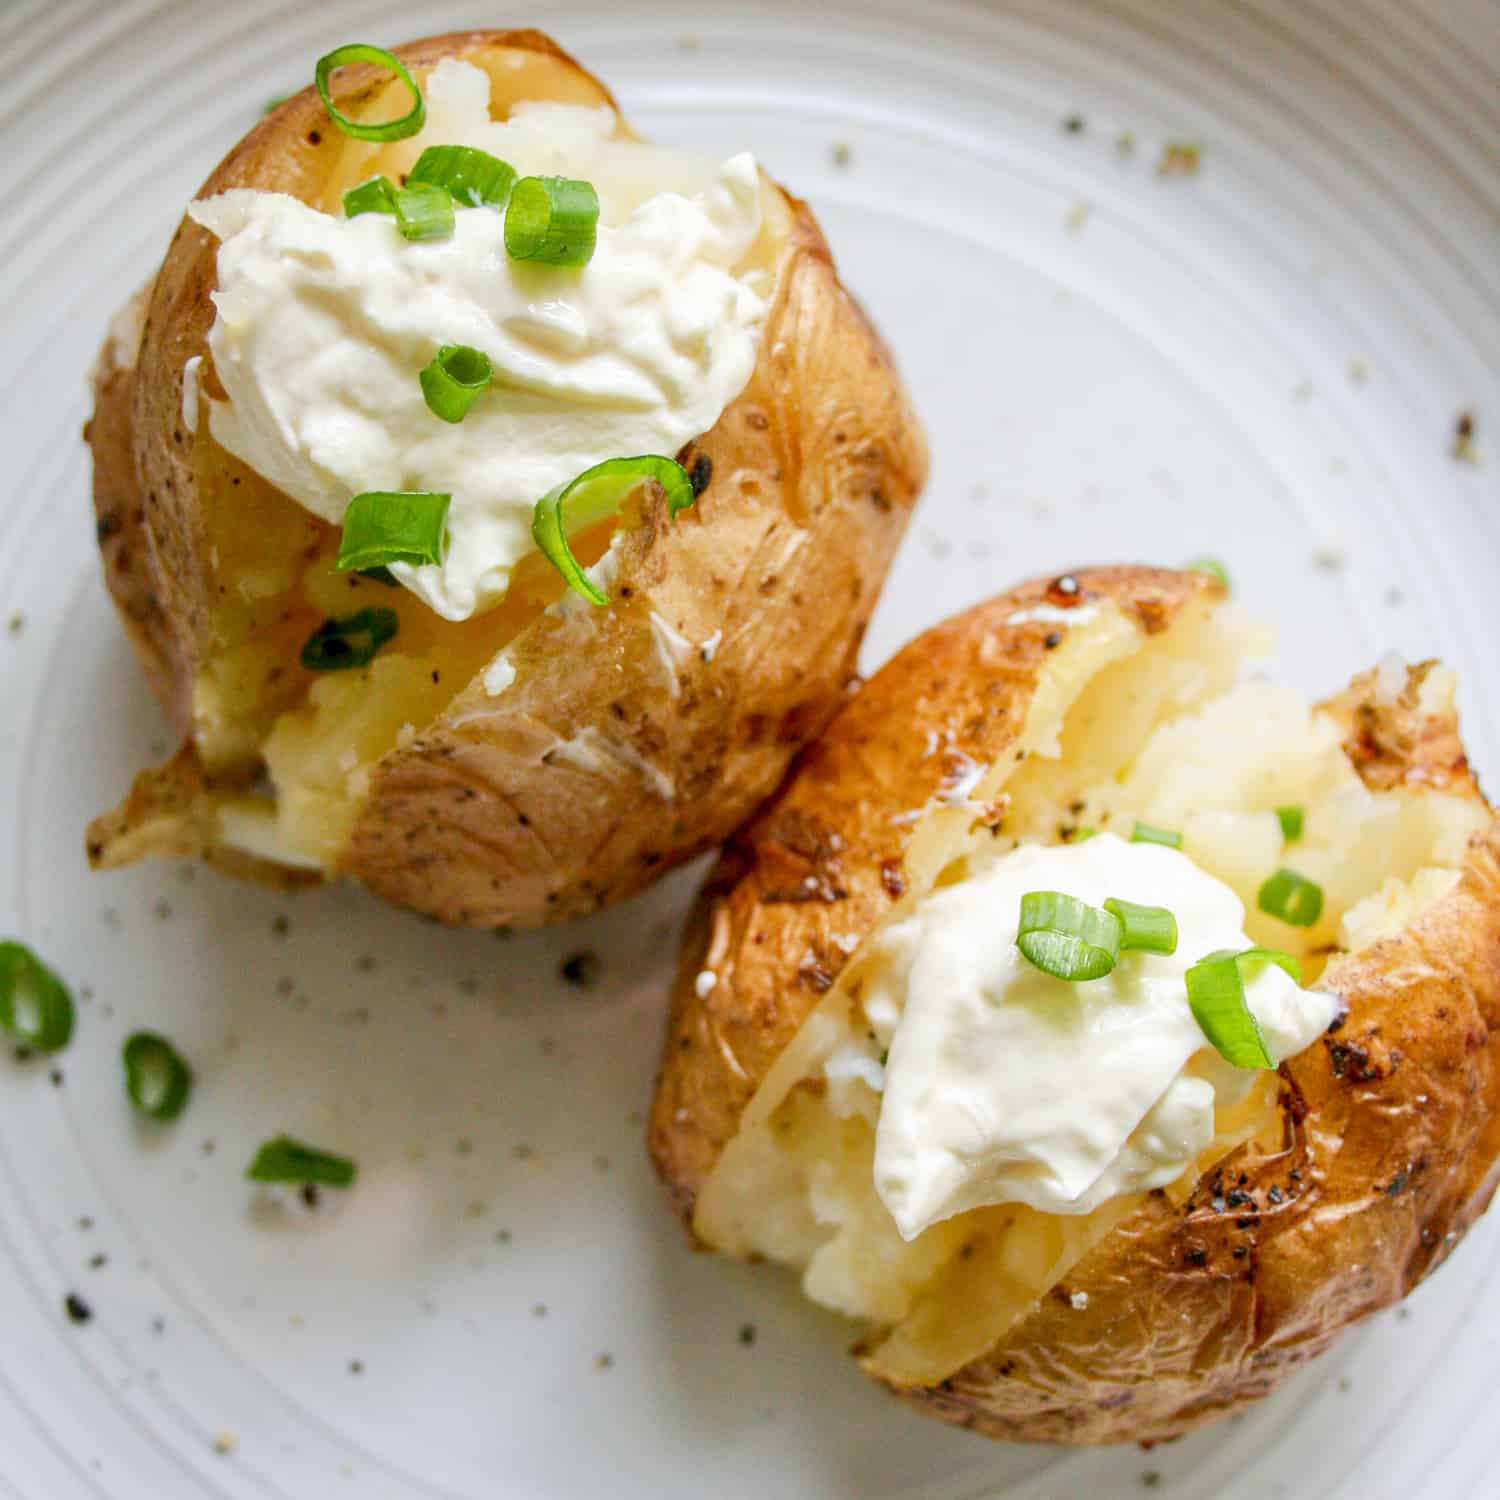 How to Make a Perfect Baked Potato Recipe - The foolproof baked potato recipe for a crispy, golden potato skin and a oft and fluffy inside. Learn the secret to getting your baked potato perfect every time! #cleaneatingwithkids #cleaneating 